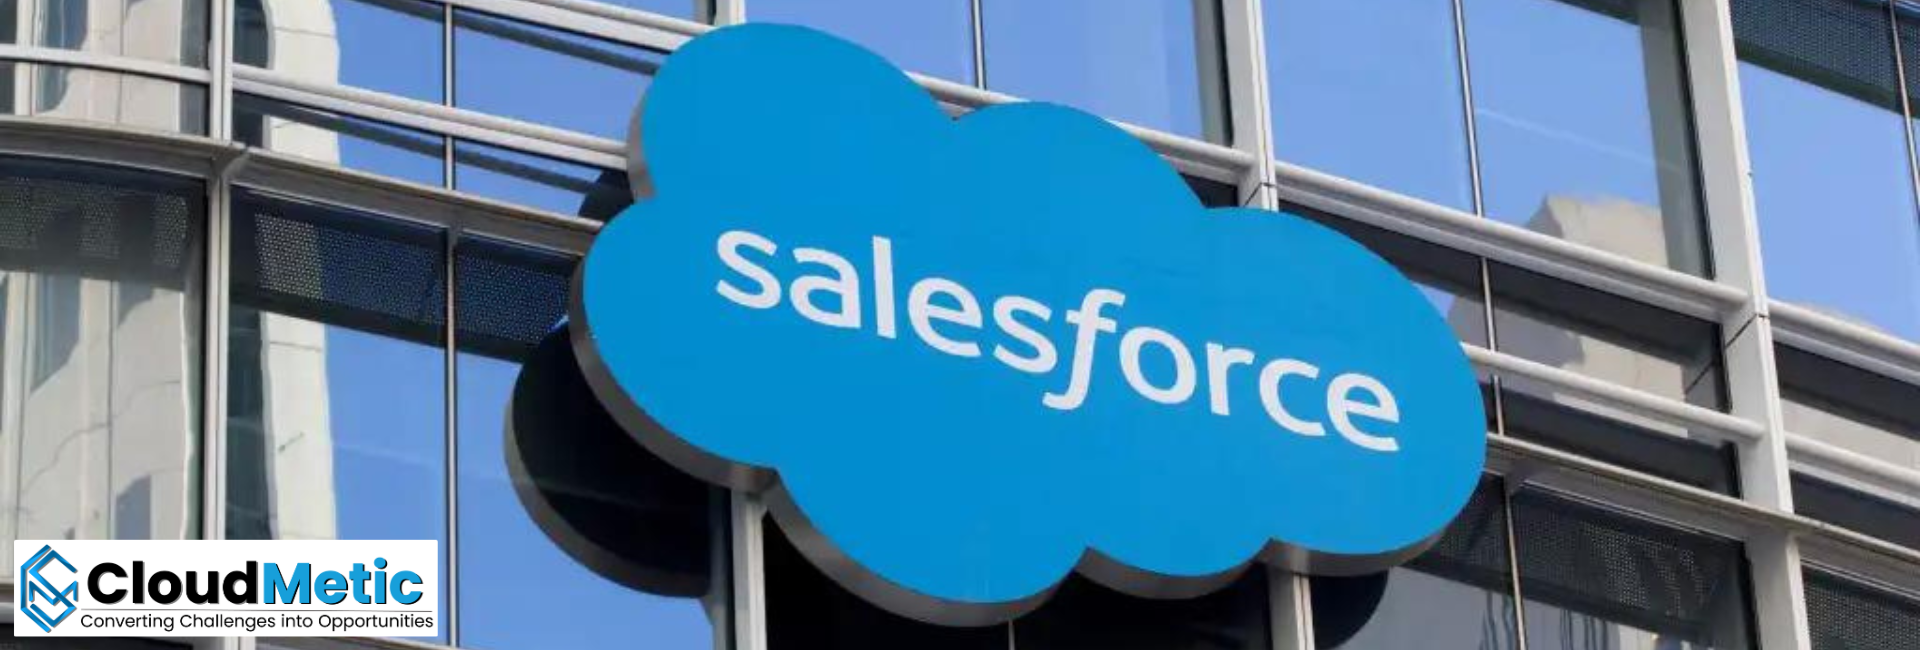 Salesforce Introduced Zero Copy Partner Network to Simplify the Process of Integrating Data